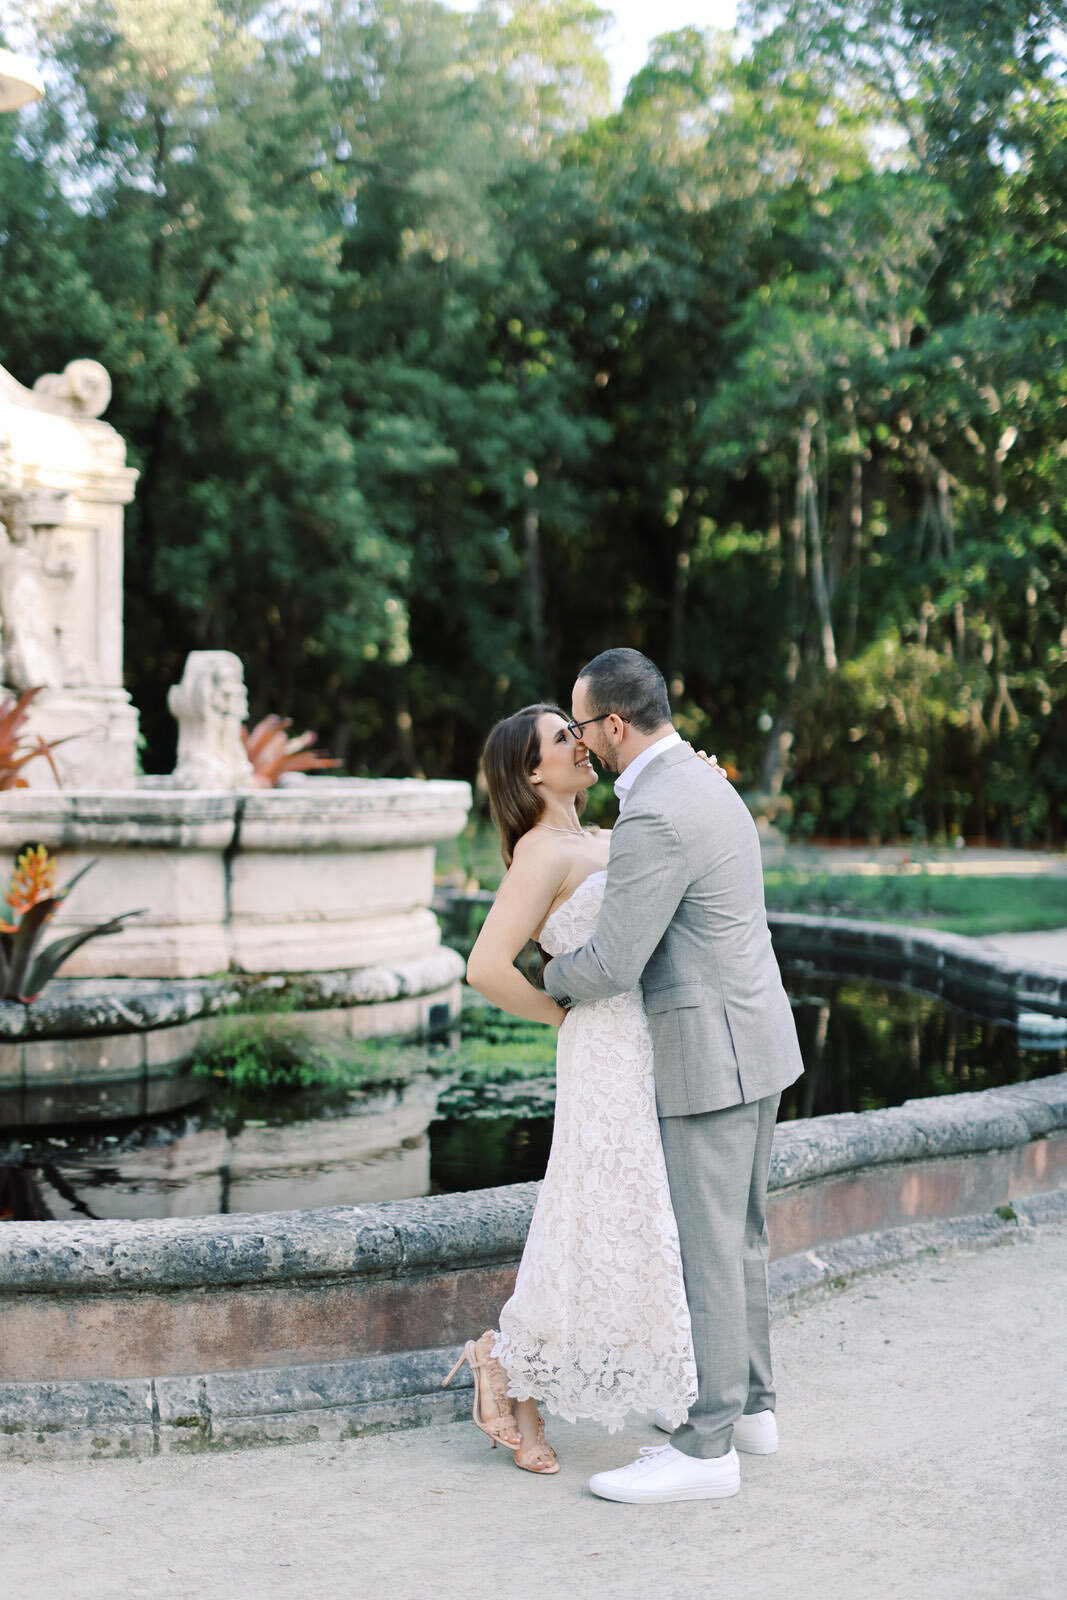 A Stylish and Chic Engagement Session at Vizcaya Museum in Miami Florida 9